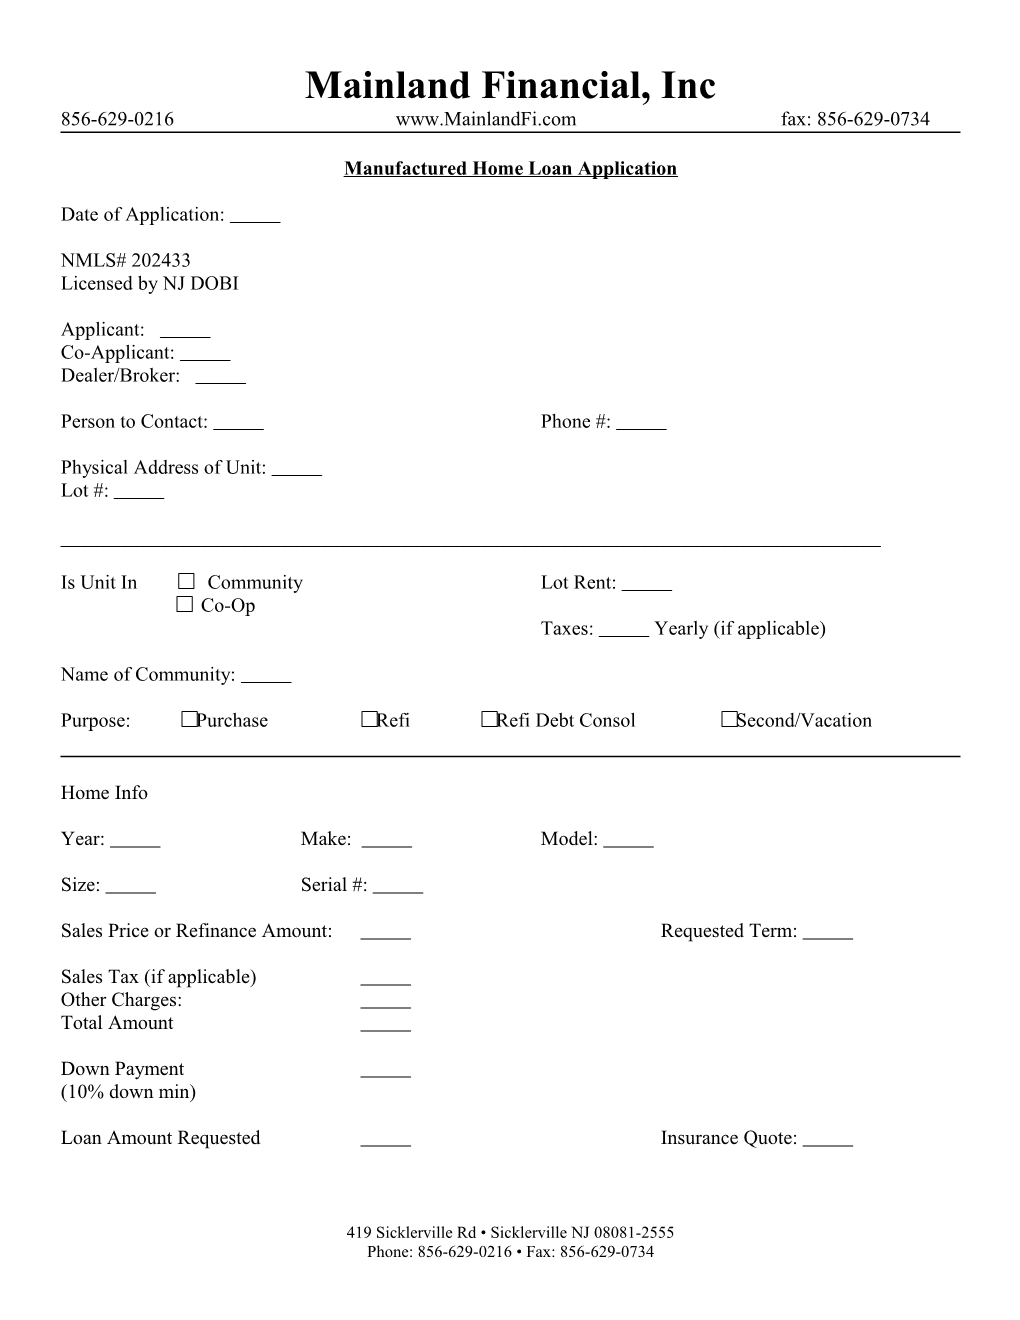 Manufactured Home Loan Application